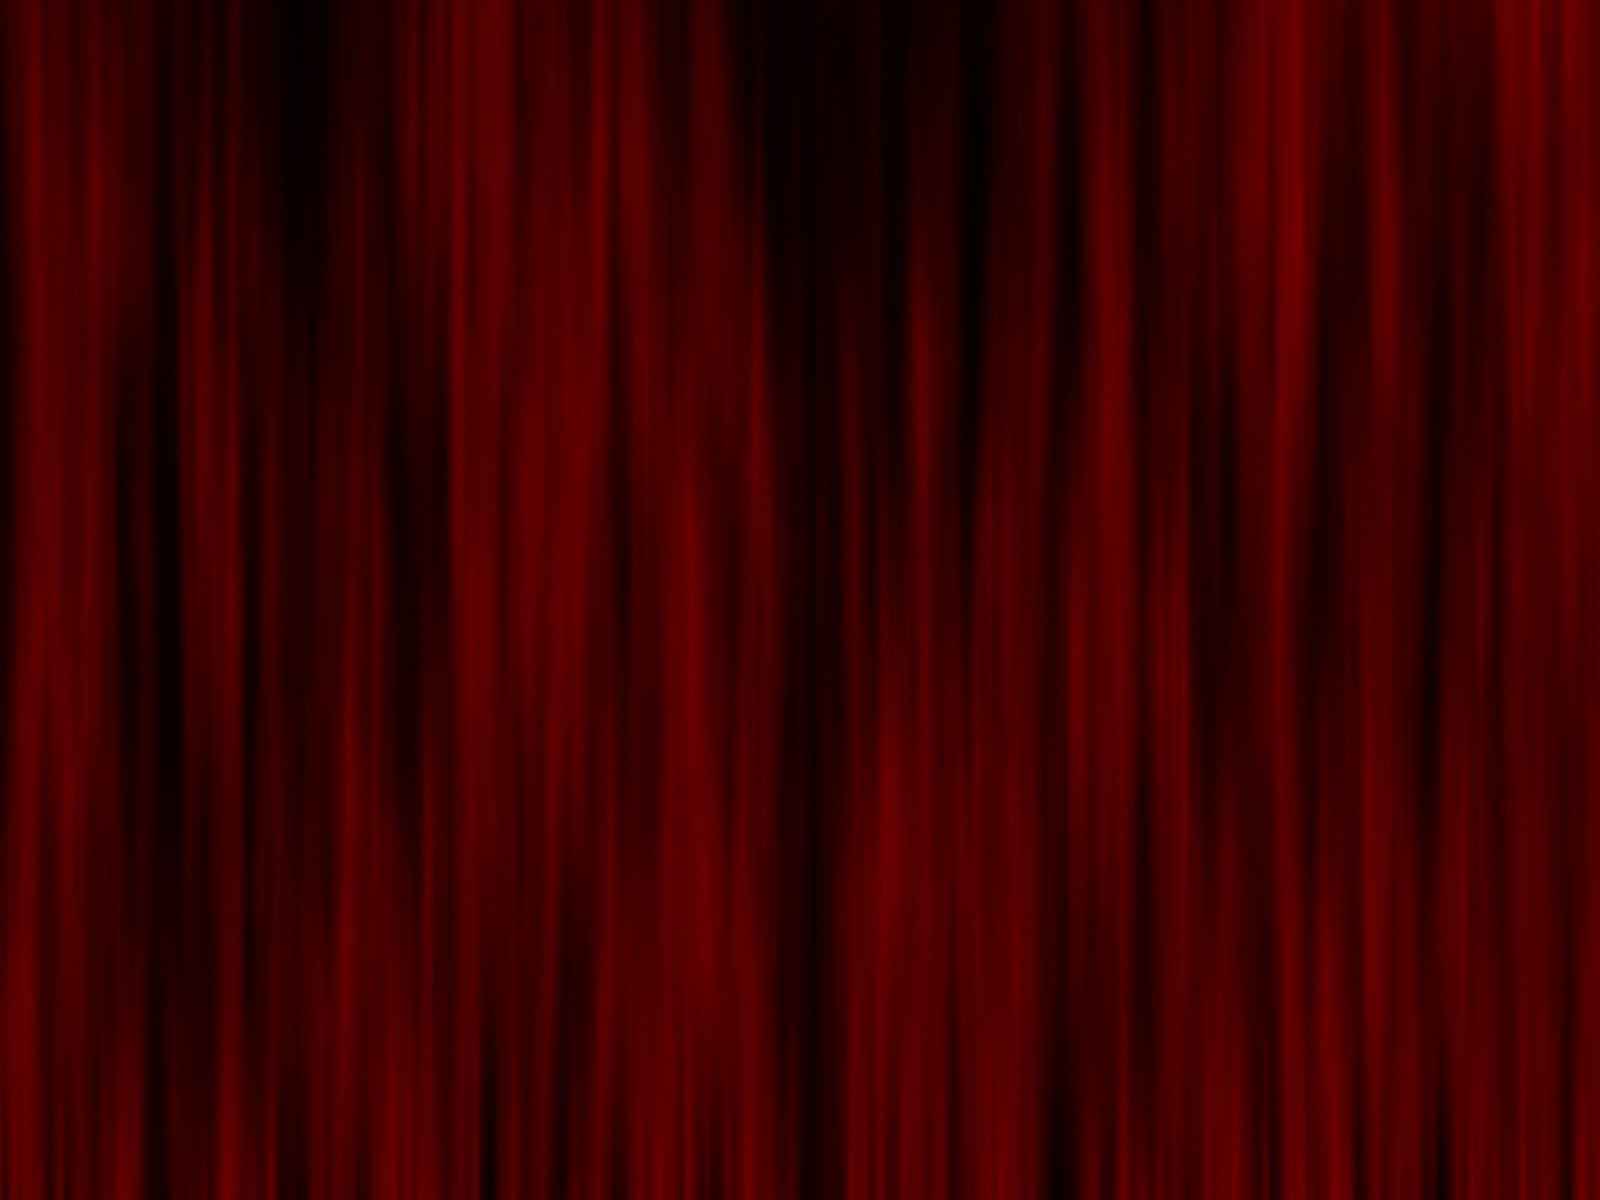 Wallpaper Curtain Red And Black